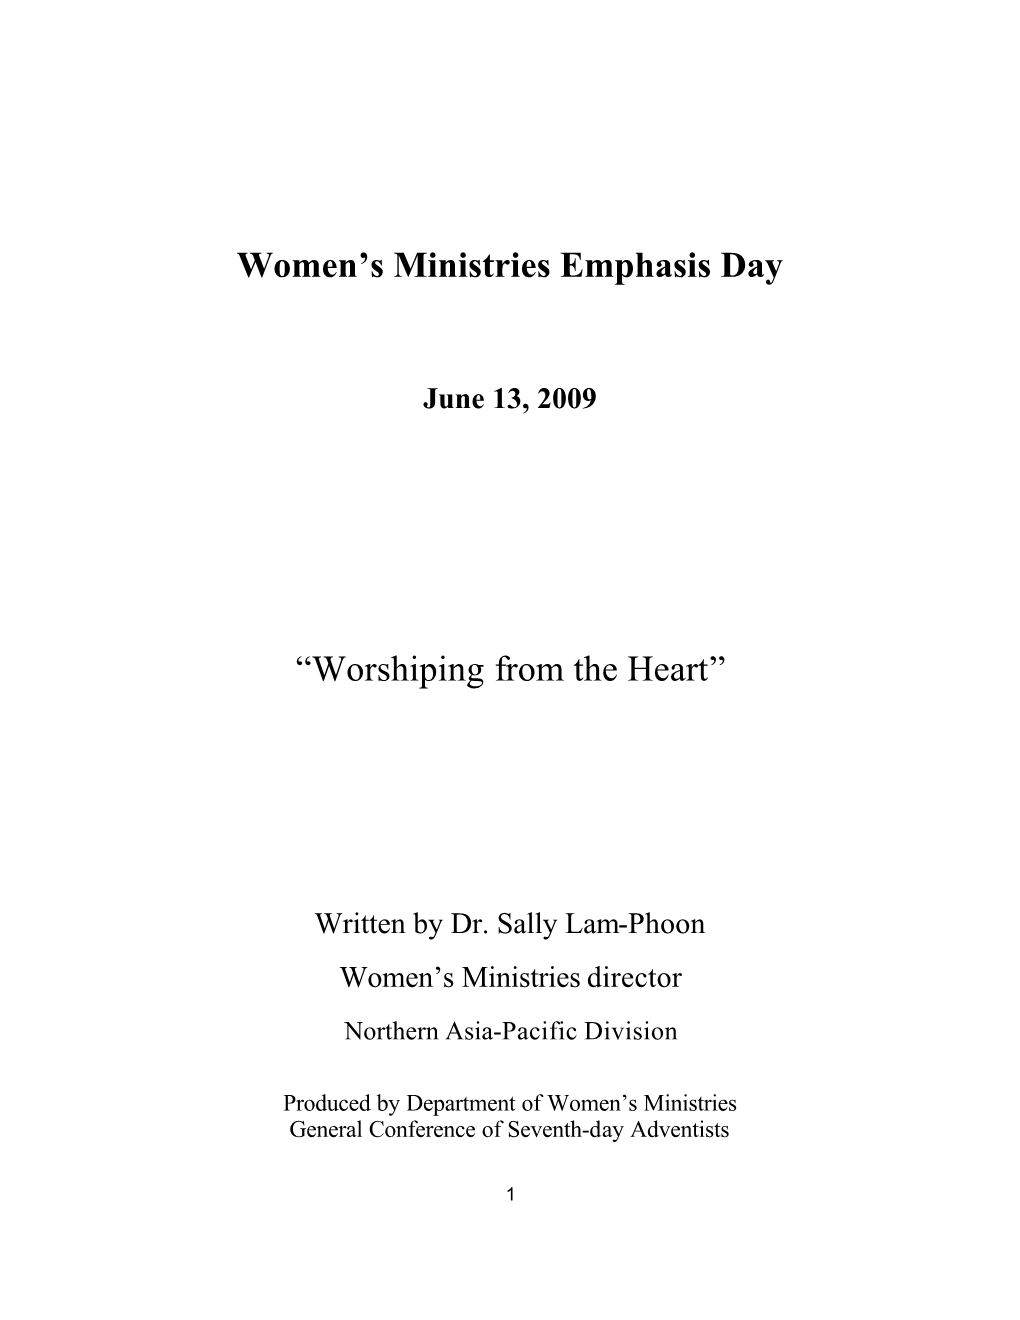 Women's Ministries Emphasis Day “Worshiping from the Heart”